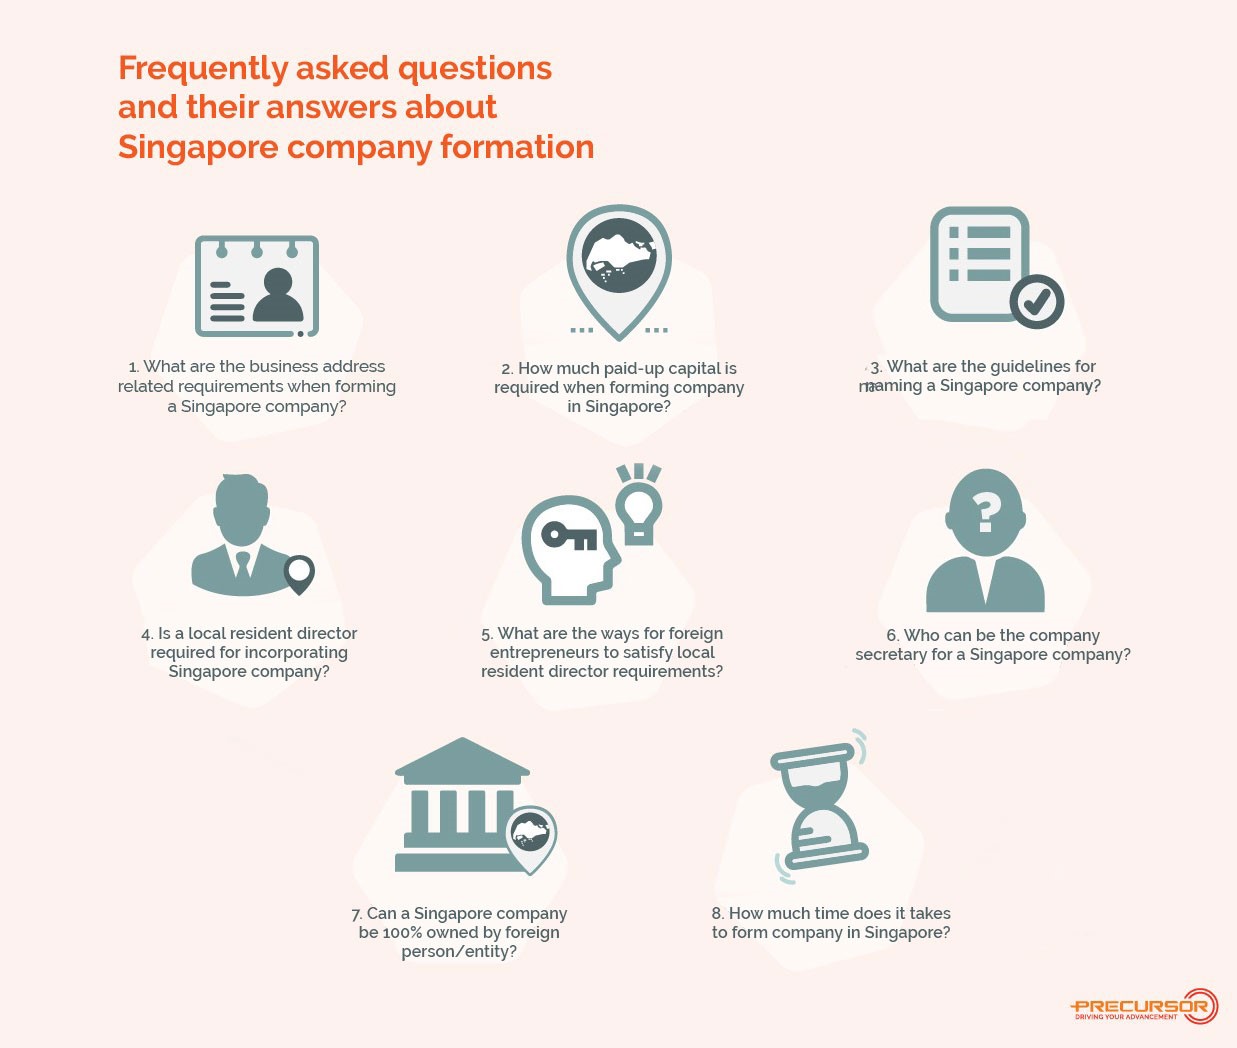 Frequently asked questions and their answers about Singapore company formation